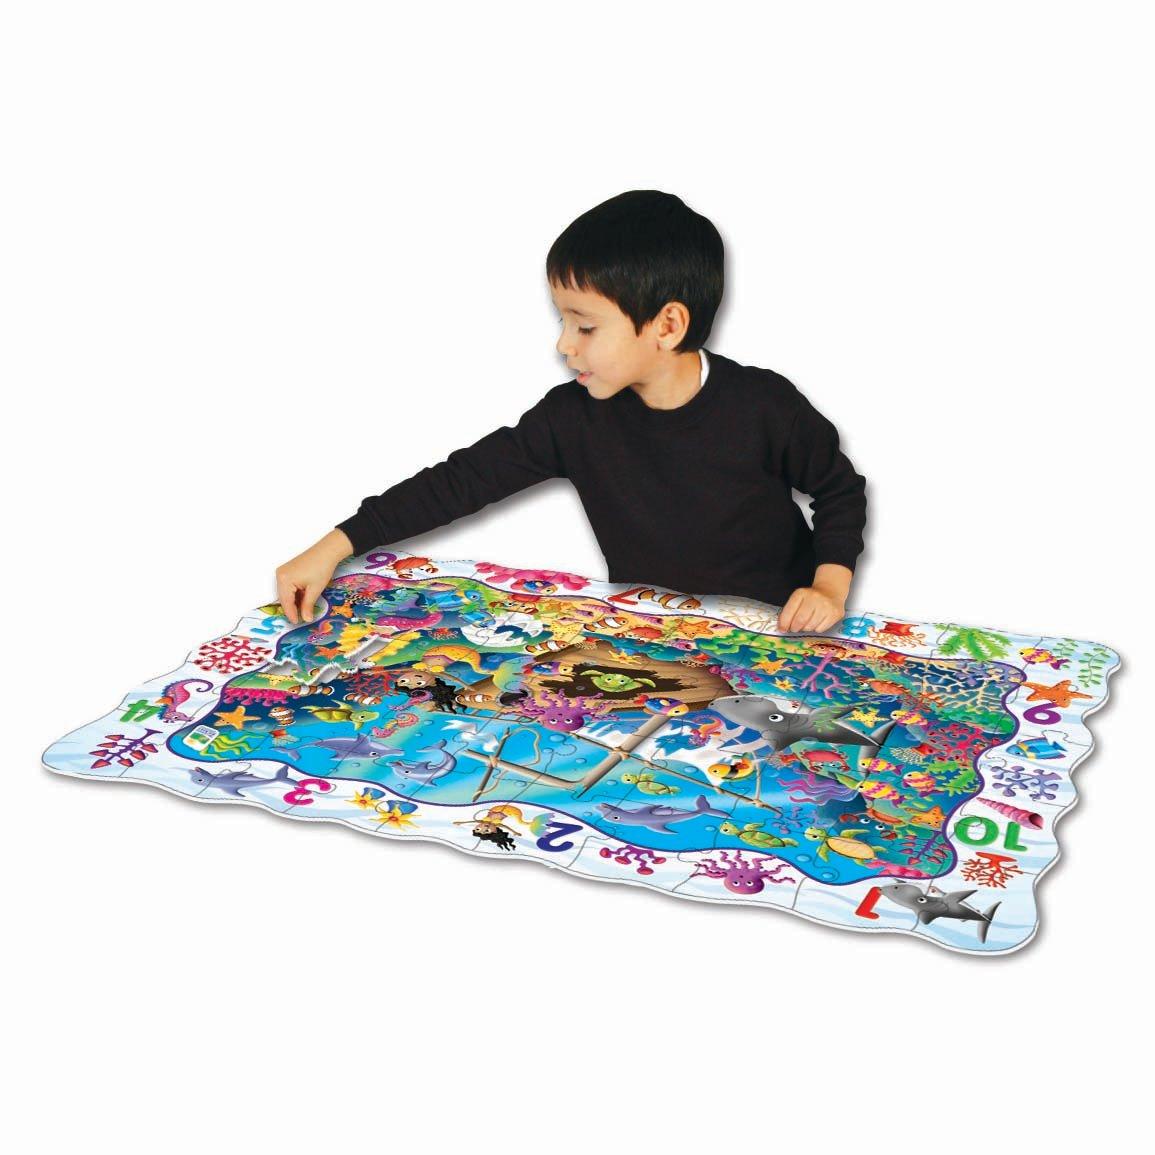 The Learning Journey Puzzle Doubles! Find It! 123 50 Piece Jigsaw Puzzle